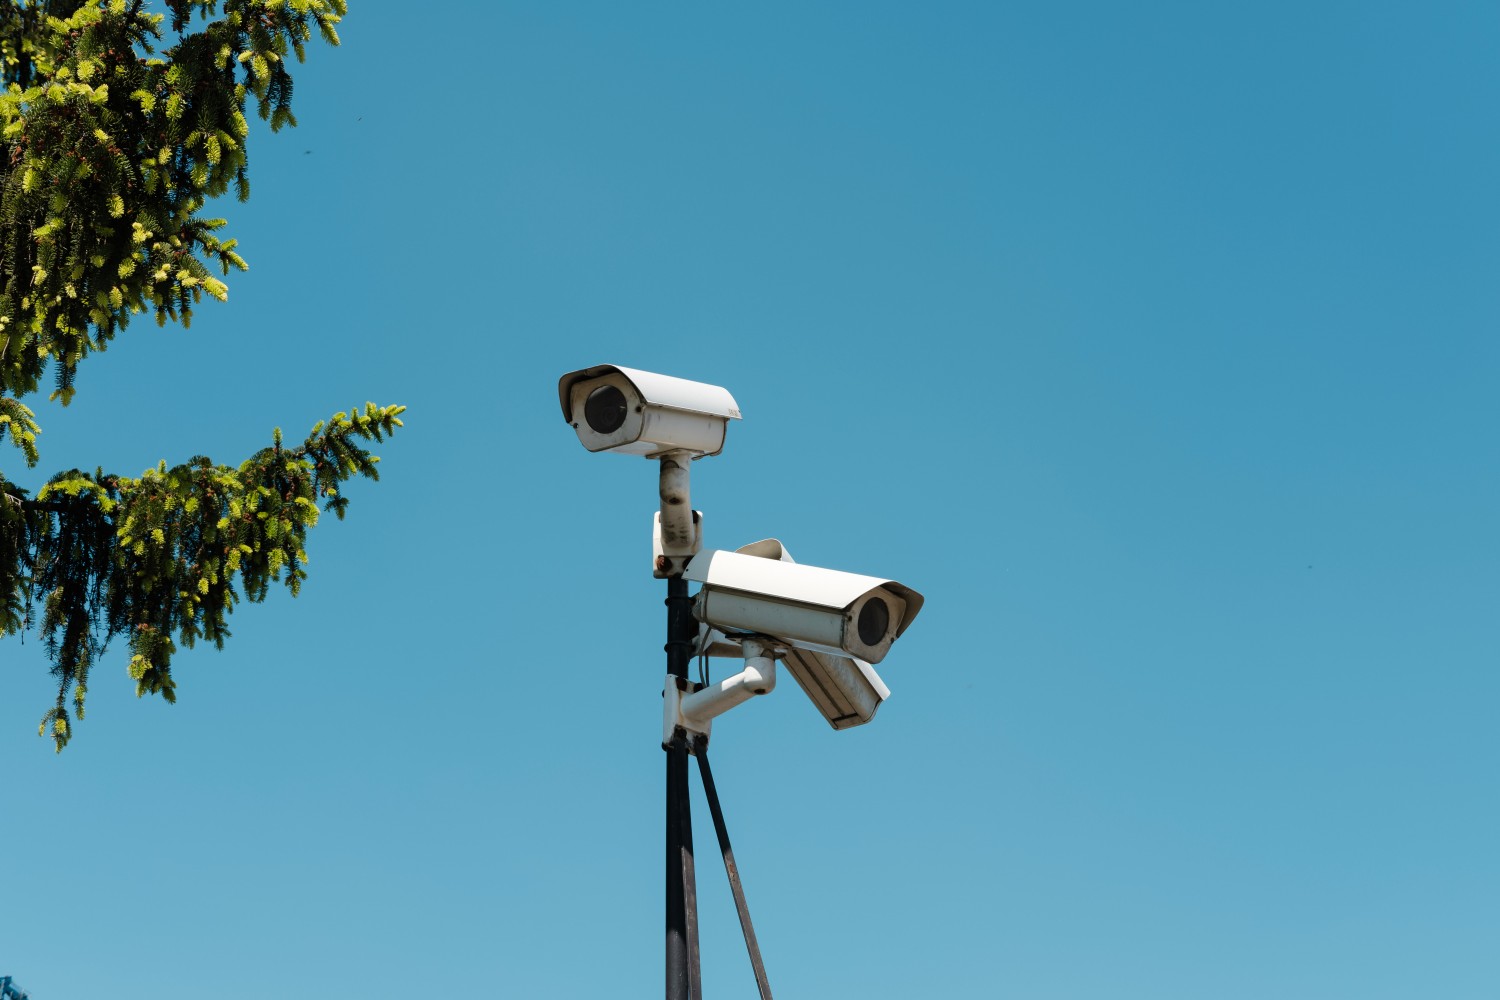 NVR vs DVR: The Differences Between Security Camera Recorders